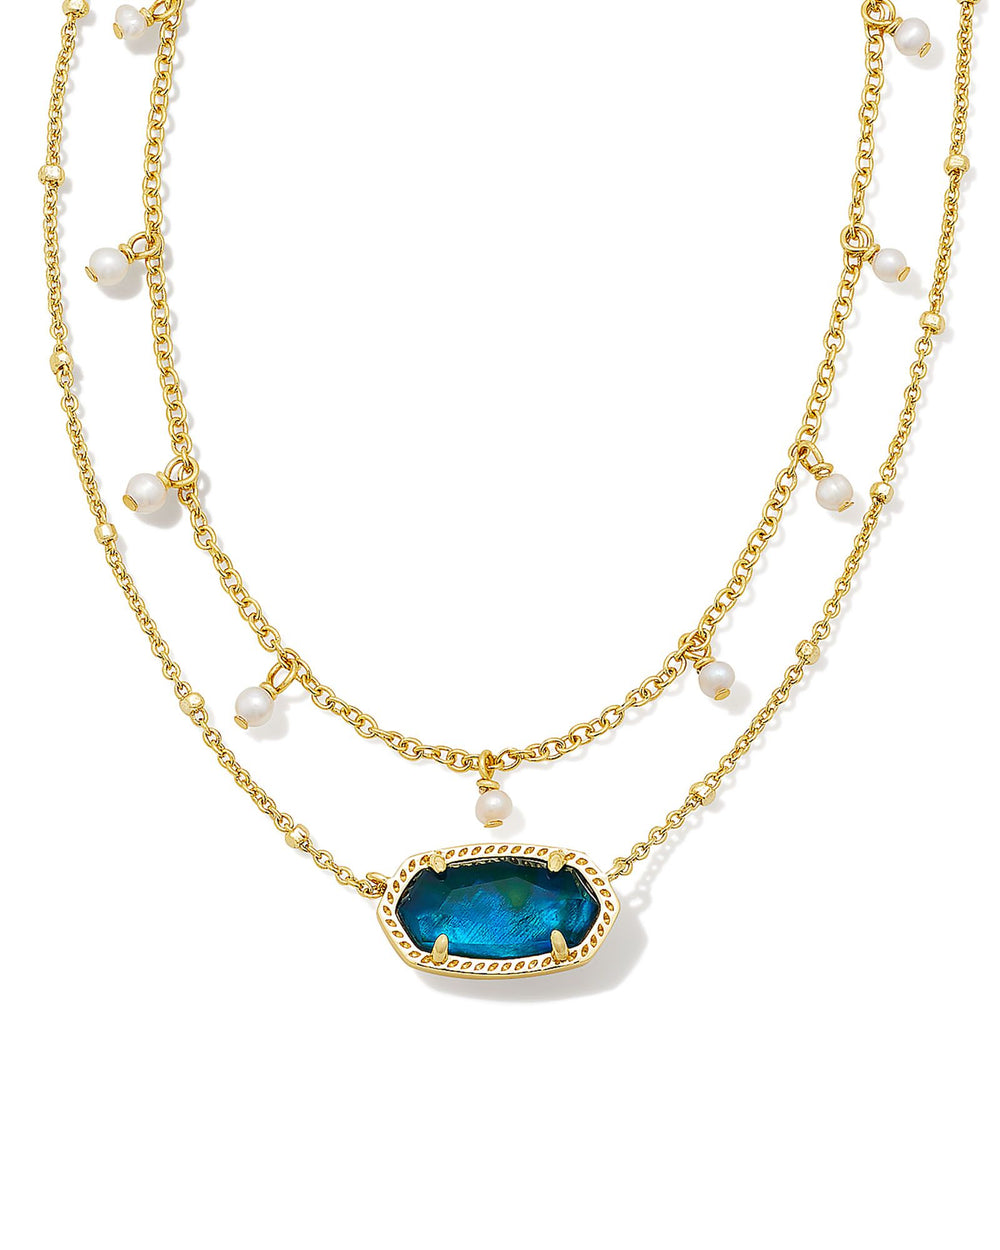 Elisa Pearl Multi Strand Necklace Gold in Teal Abalone